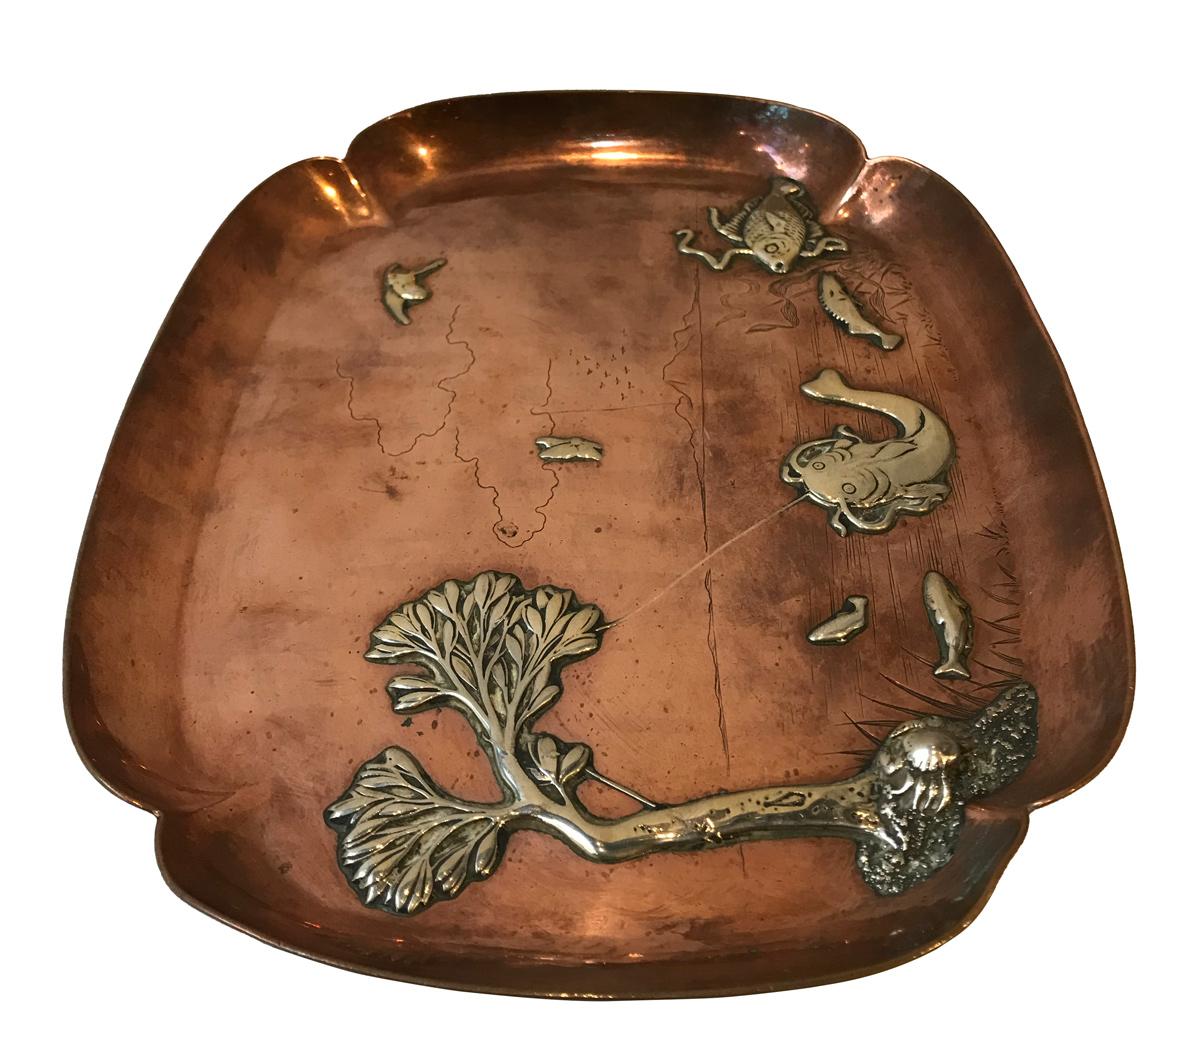 Astonishing and precious this mixed metals tray is very rare, from American Aesthetic Movement inspired by the Japonism style. 
The base of the tray is of heavy copper with an original patina and ornated with delicate sterling silver decorations,